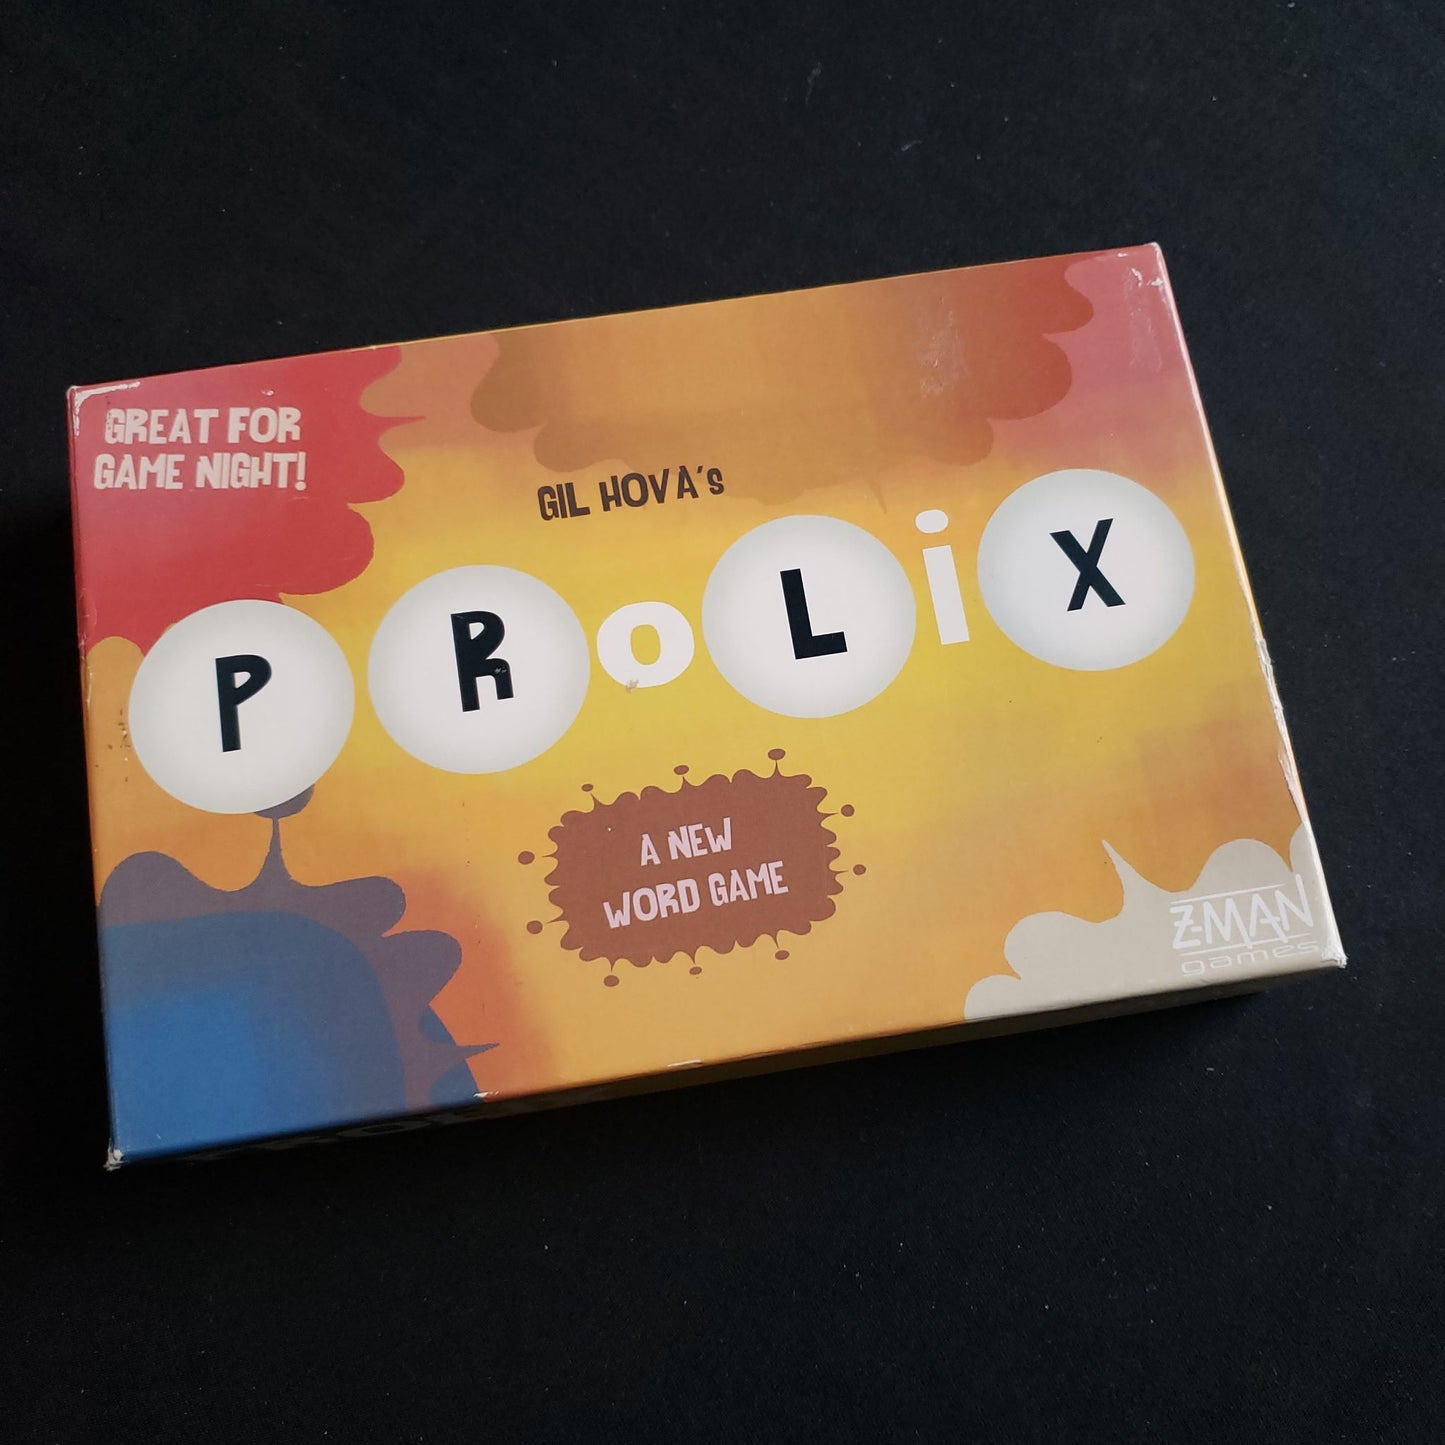 Image shows the front cover of the box of the Prolix word game